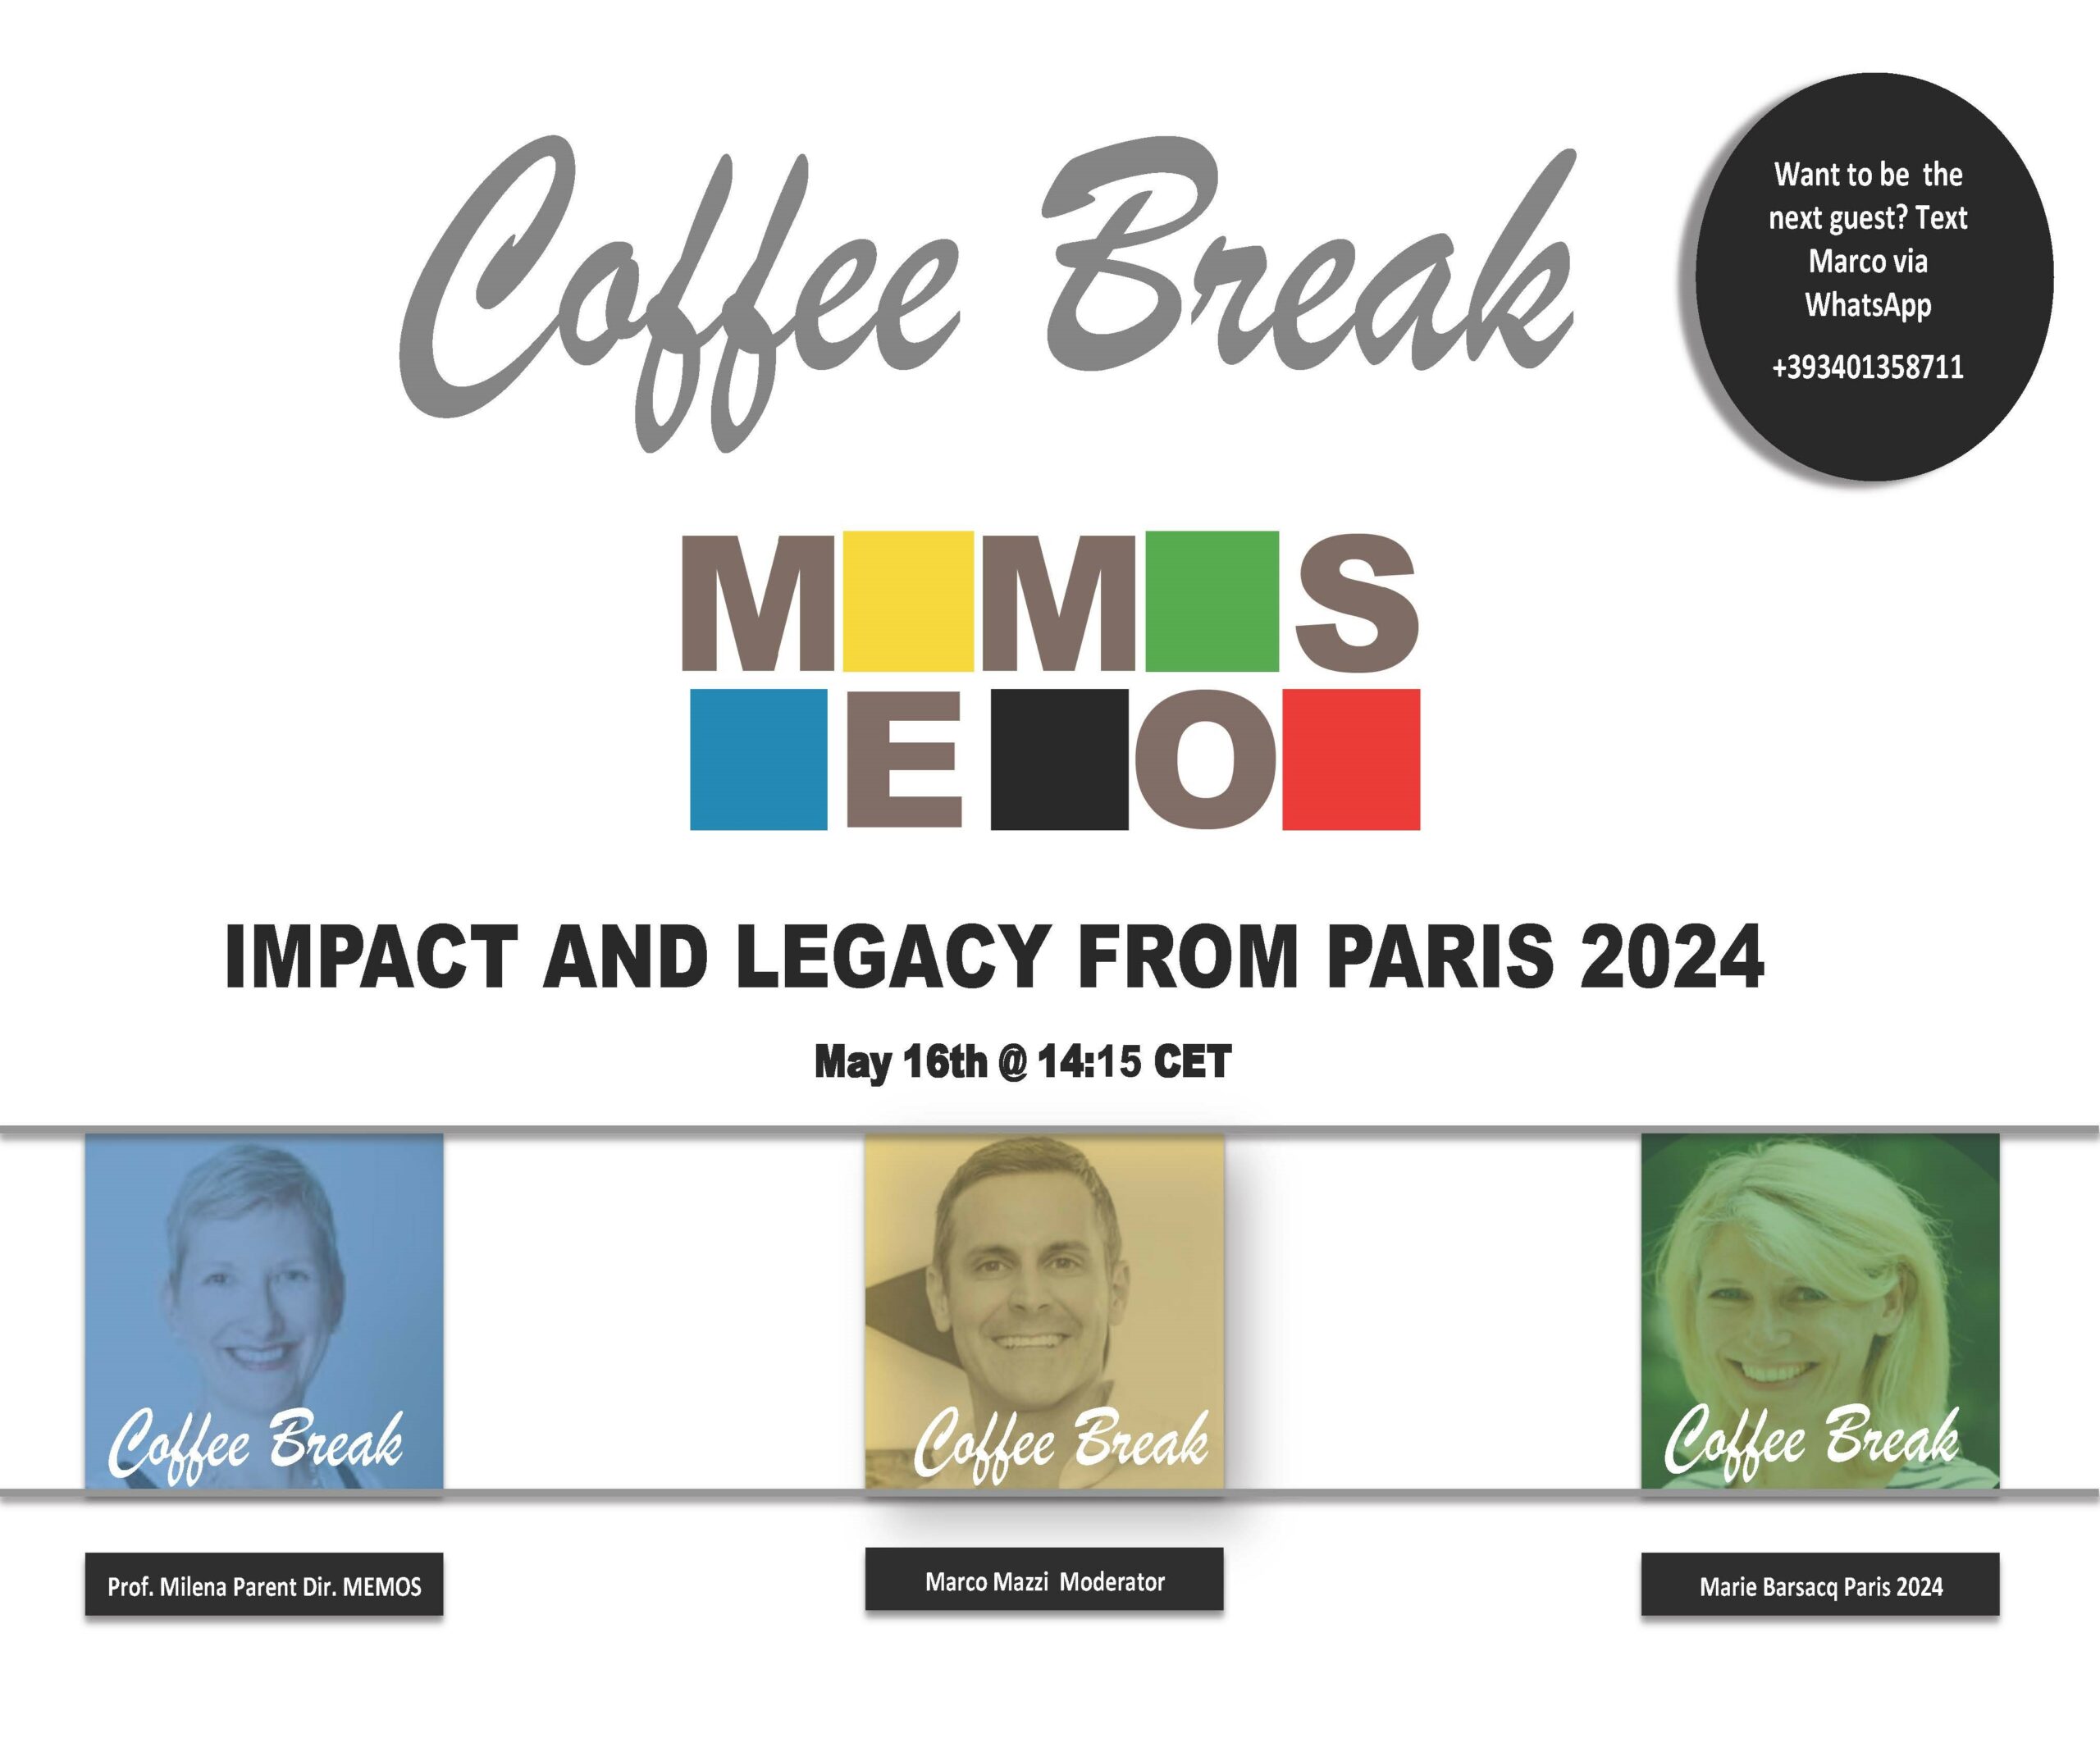 Join us for the upcoming Coffee Break on Thursday, May 16th, featuring a conversation with Director of English Milena Parent, PhD Parent and Director of Impact and Legacy for Paris 2024, Marie Barsacq!